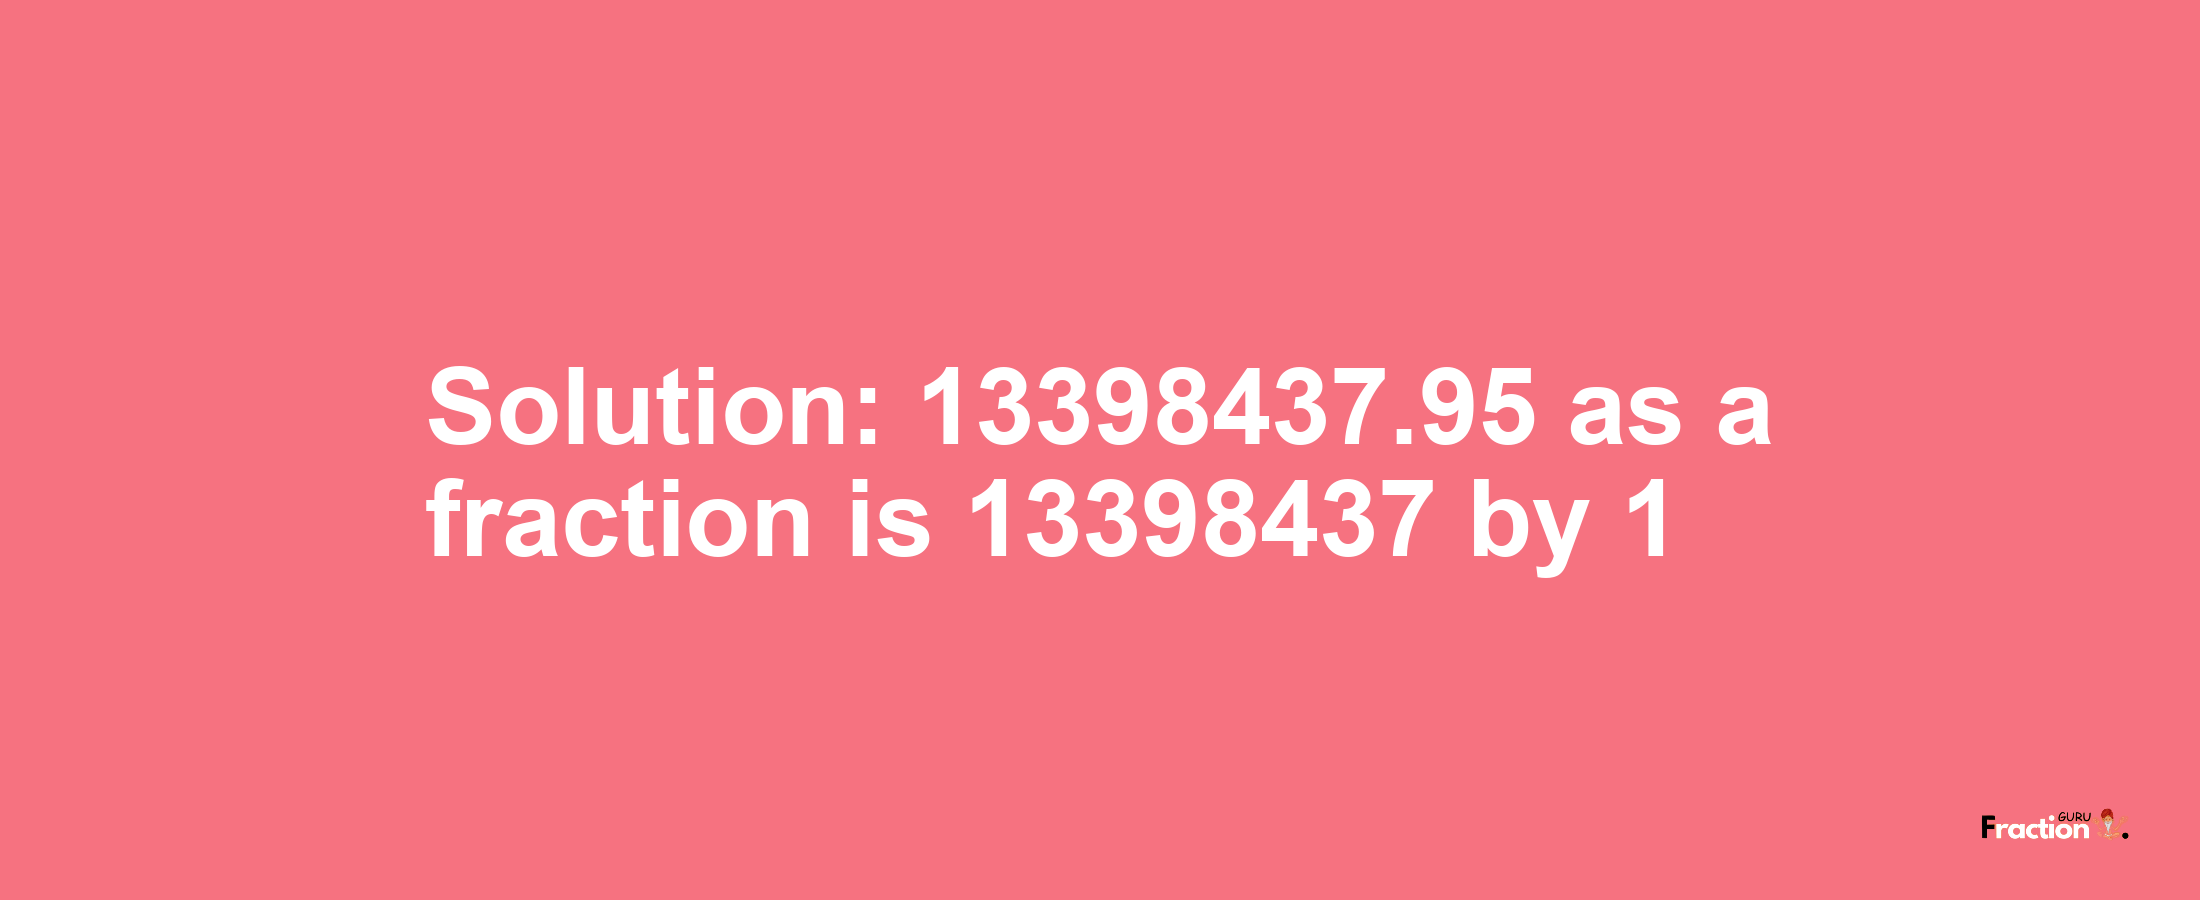 Solution:13398437.95 as a fraction is 13398437/1